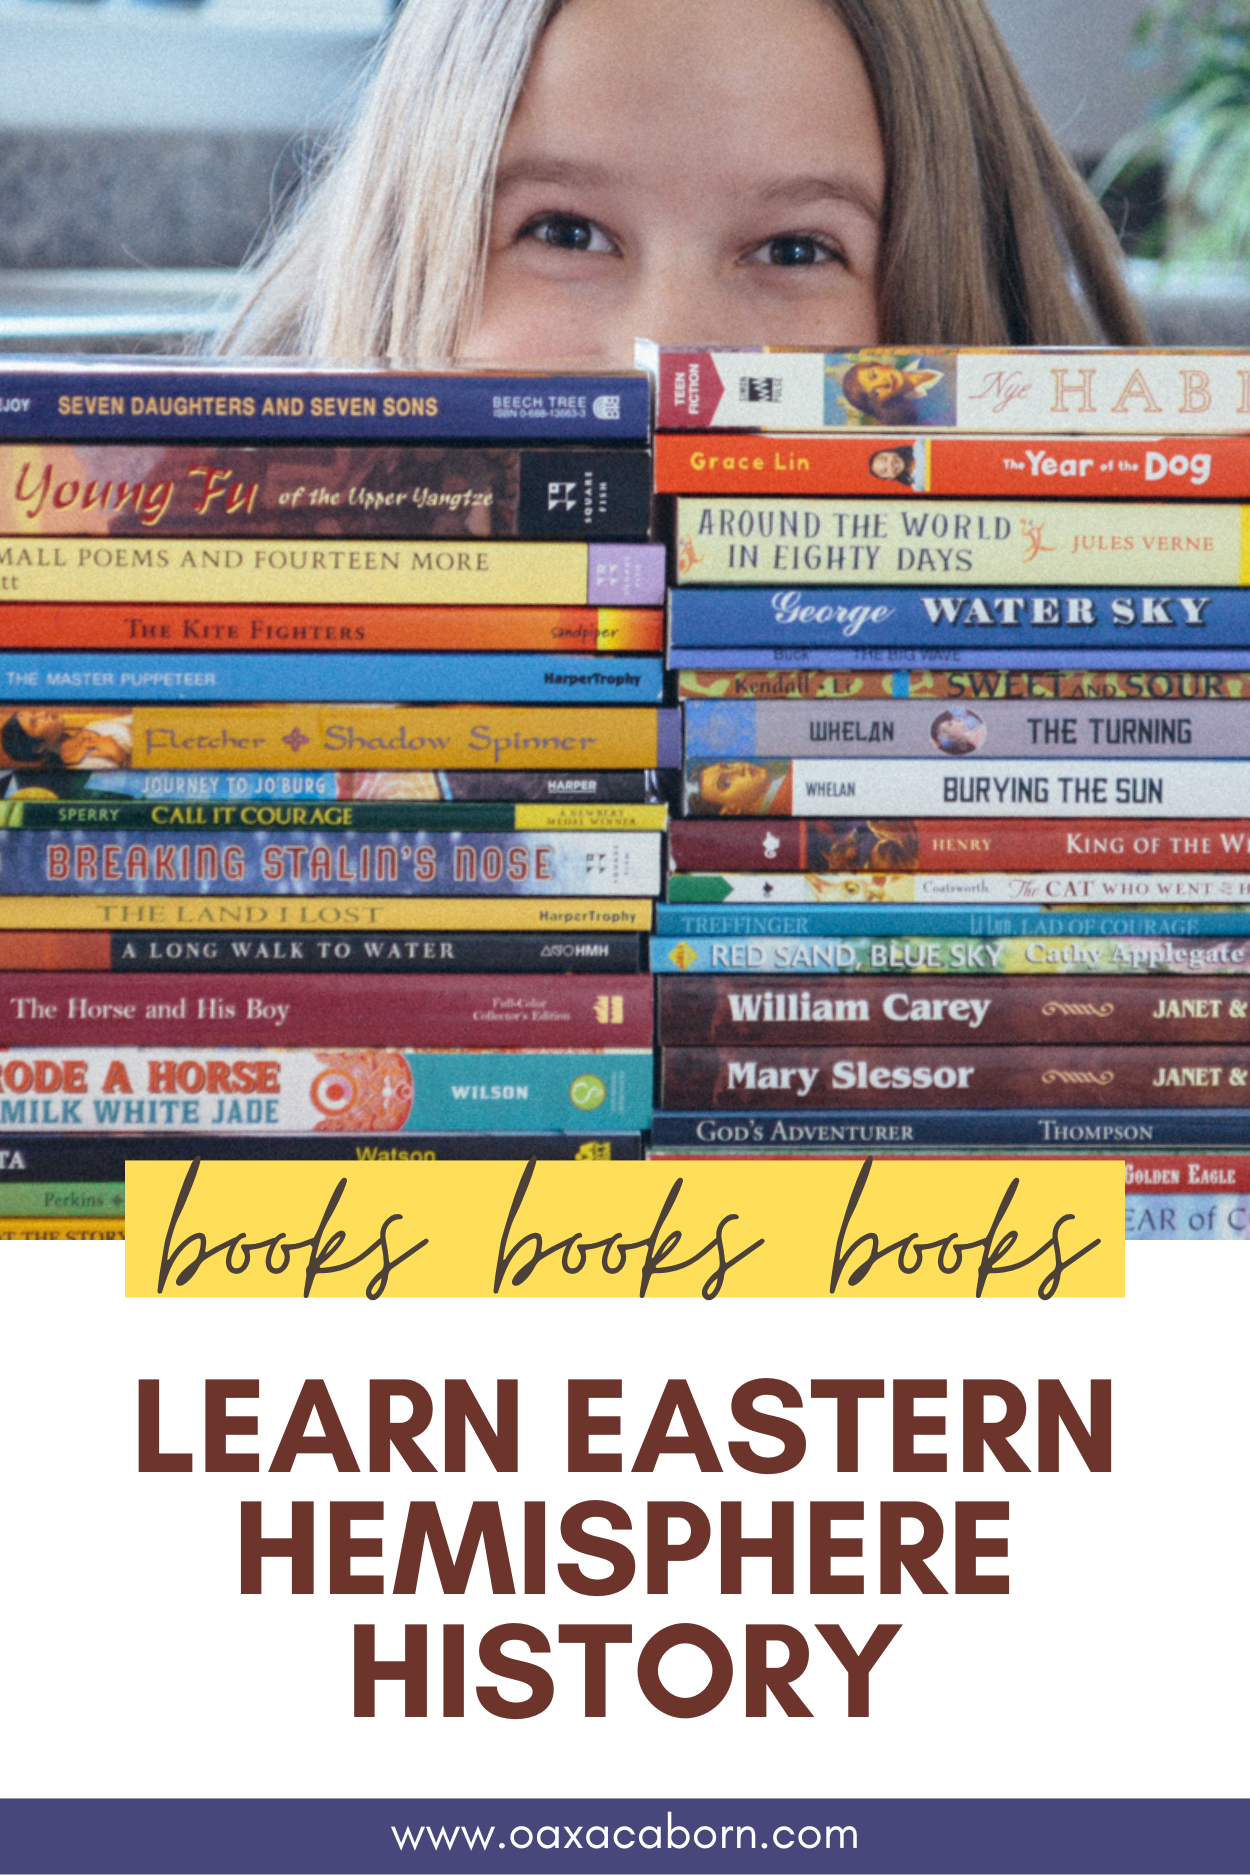 Learn Eastern Hemisphere history with Sonlight's History / Bible / Literature F homeschool curriculum for middle school grades